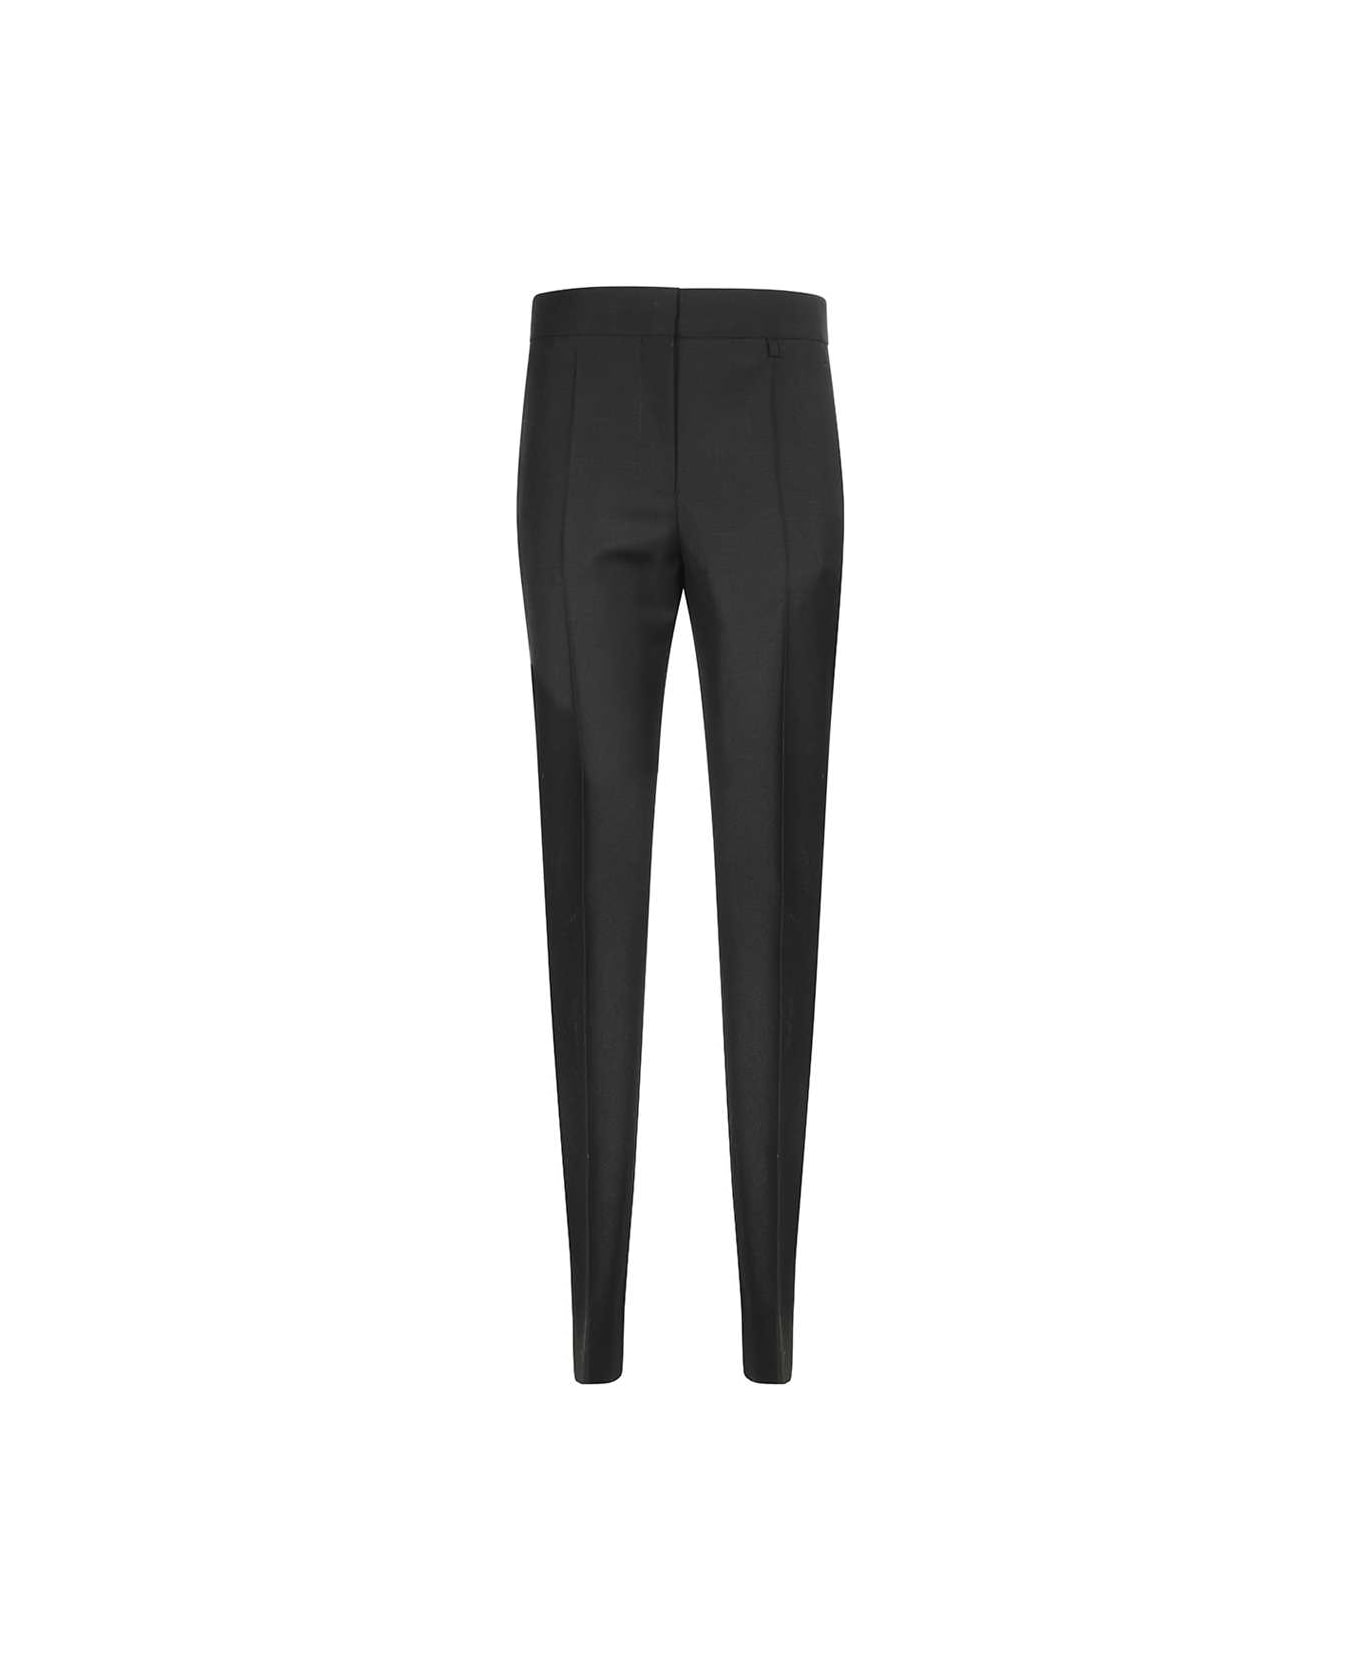 Givenchy Wool Blend Trousers - black